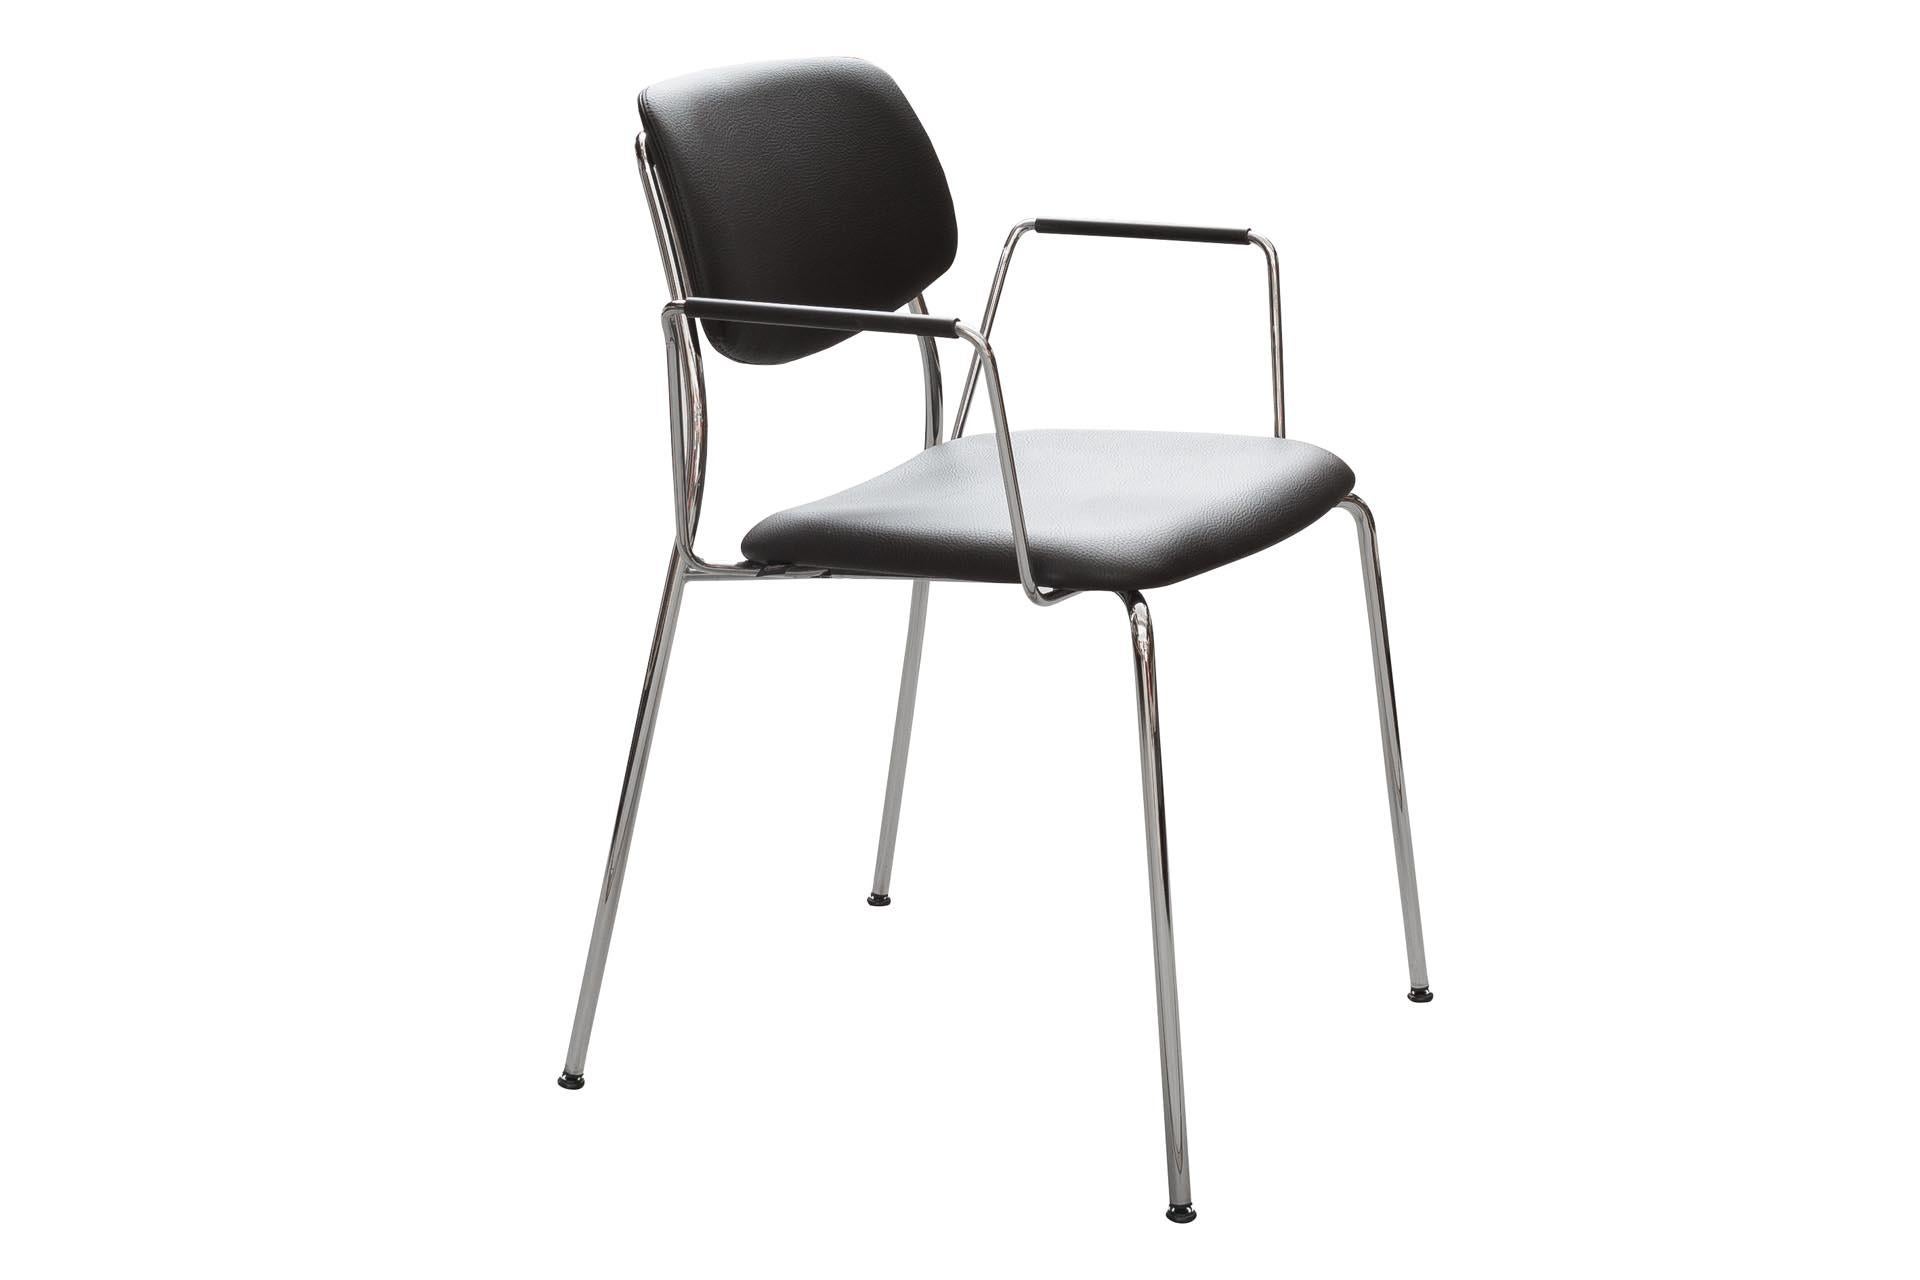 Swiss Dietiker Felber C14 Metal Dining Chair with Arms, Modular Design, Set of 2 For Sale